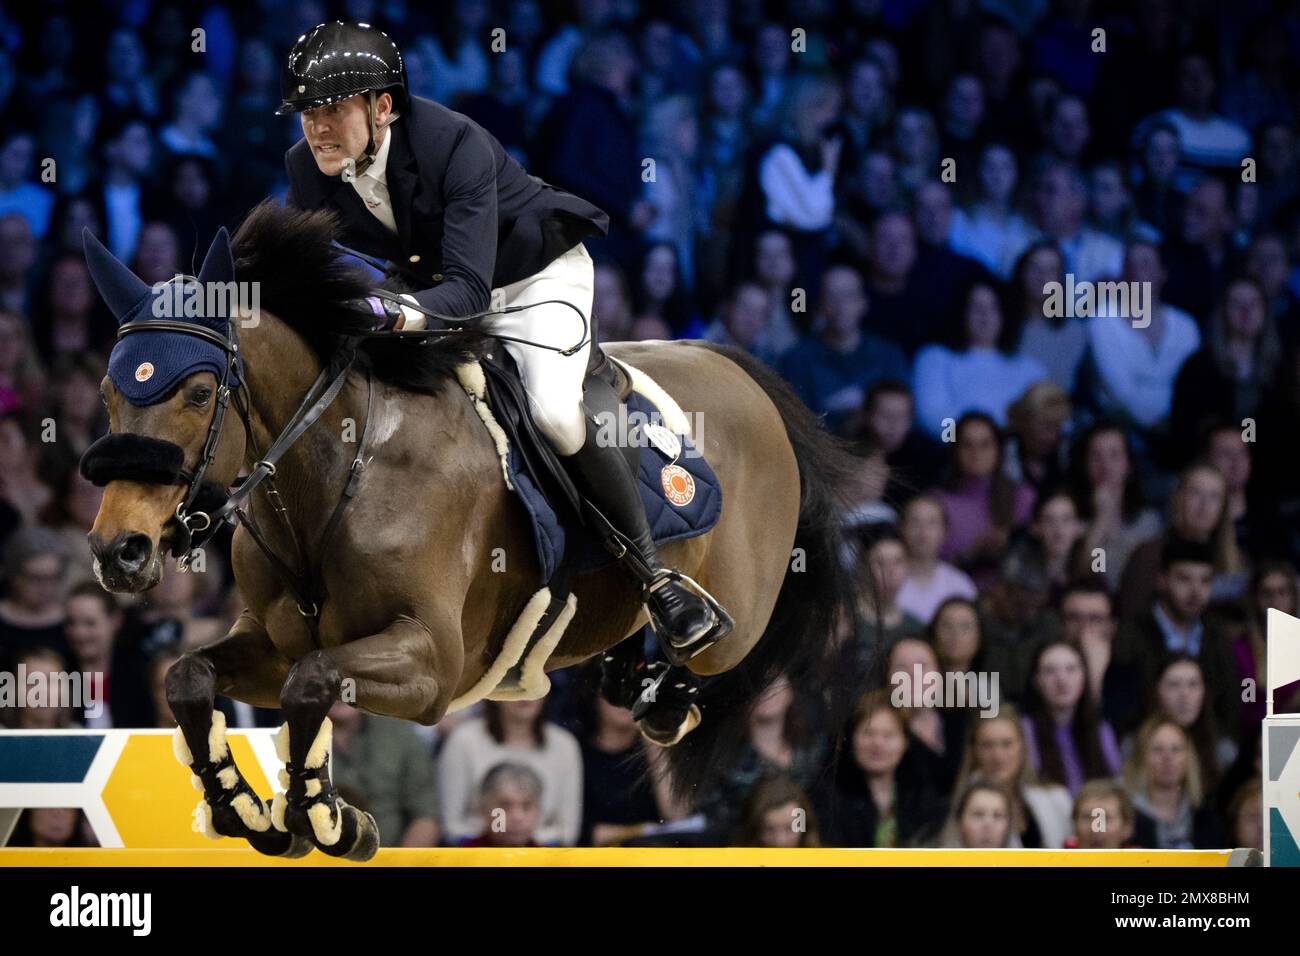 AMSTERDAM - Rider Simon Delestre (FRA) on Cayman Jolly Jumper during the FEI Jumping world Cup at Jumping Amsterdam 2023 at RAI Amsterdam on January 29, 2023 in Amsterdam, Netherlands. AP SANDER KING Stock Photo